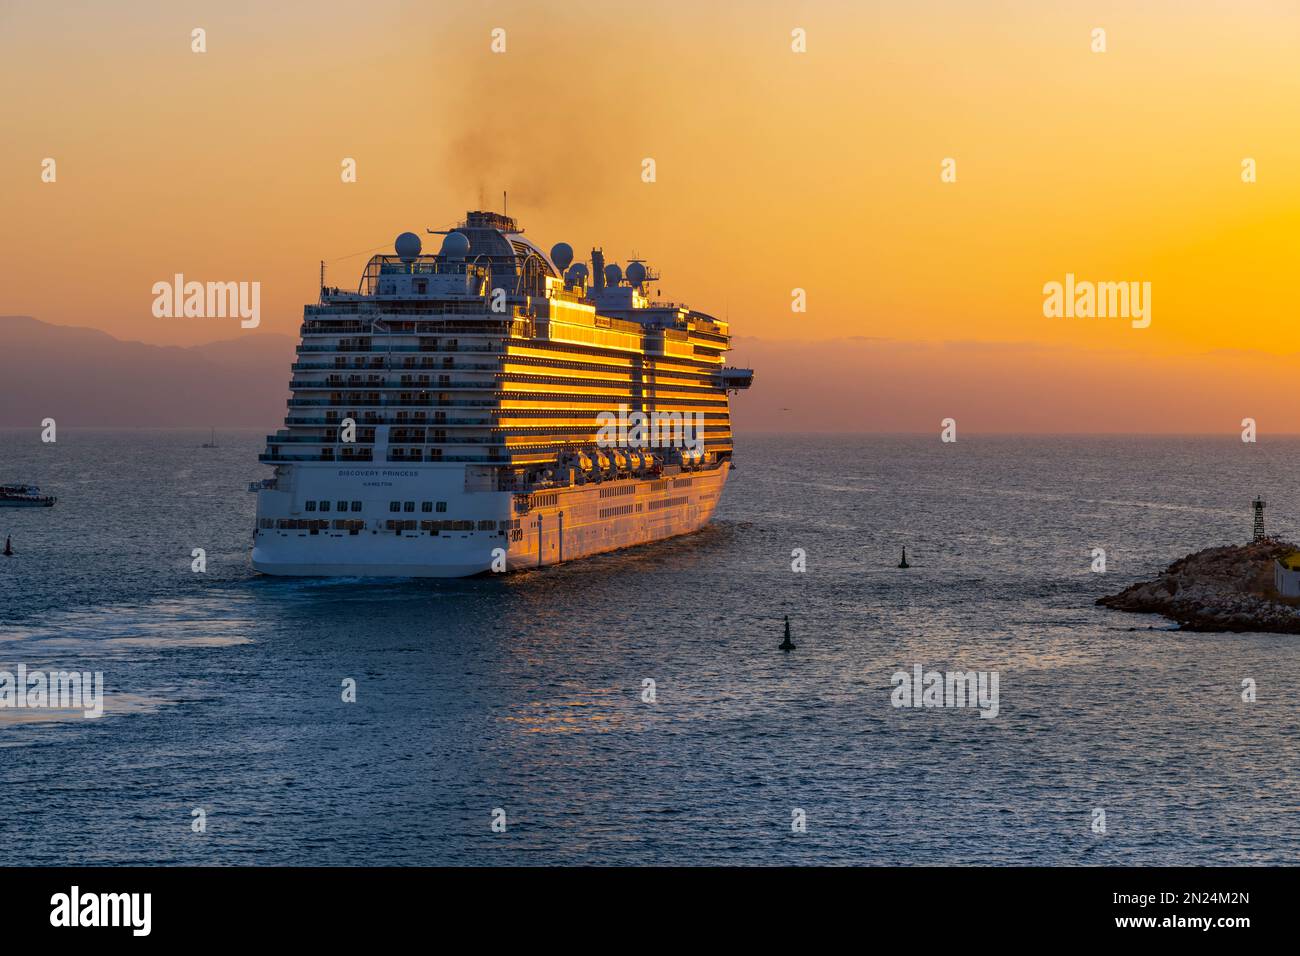 A large cruise ship heads out at sunset from the port of Puerto Vallarta, Mexico. Stock Photo